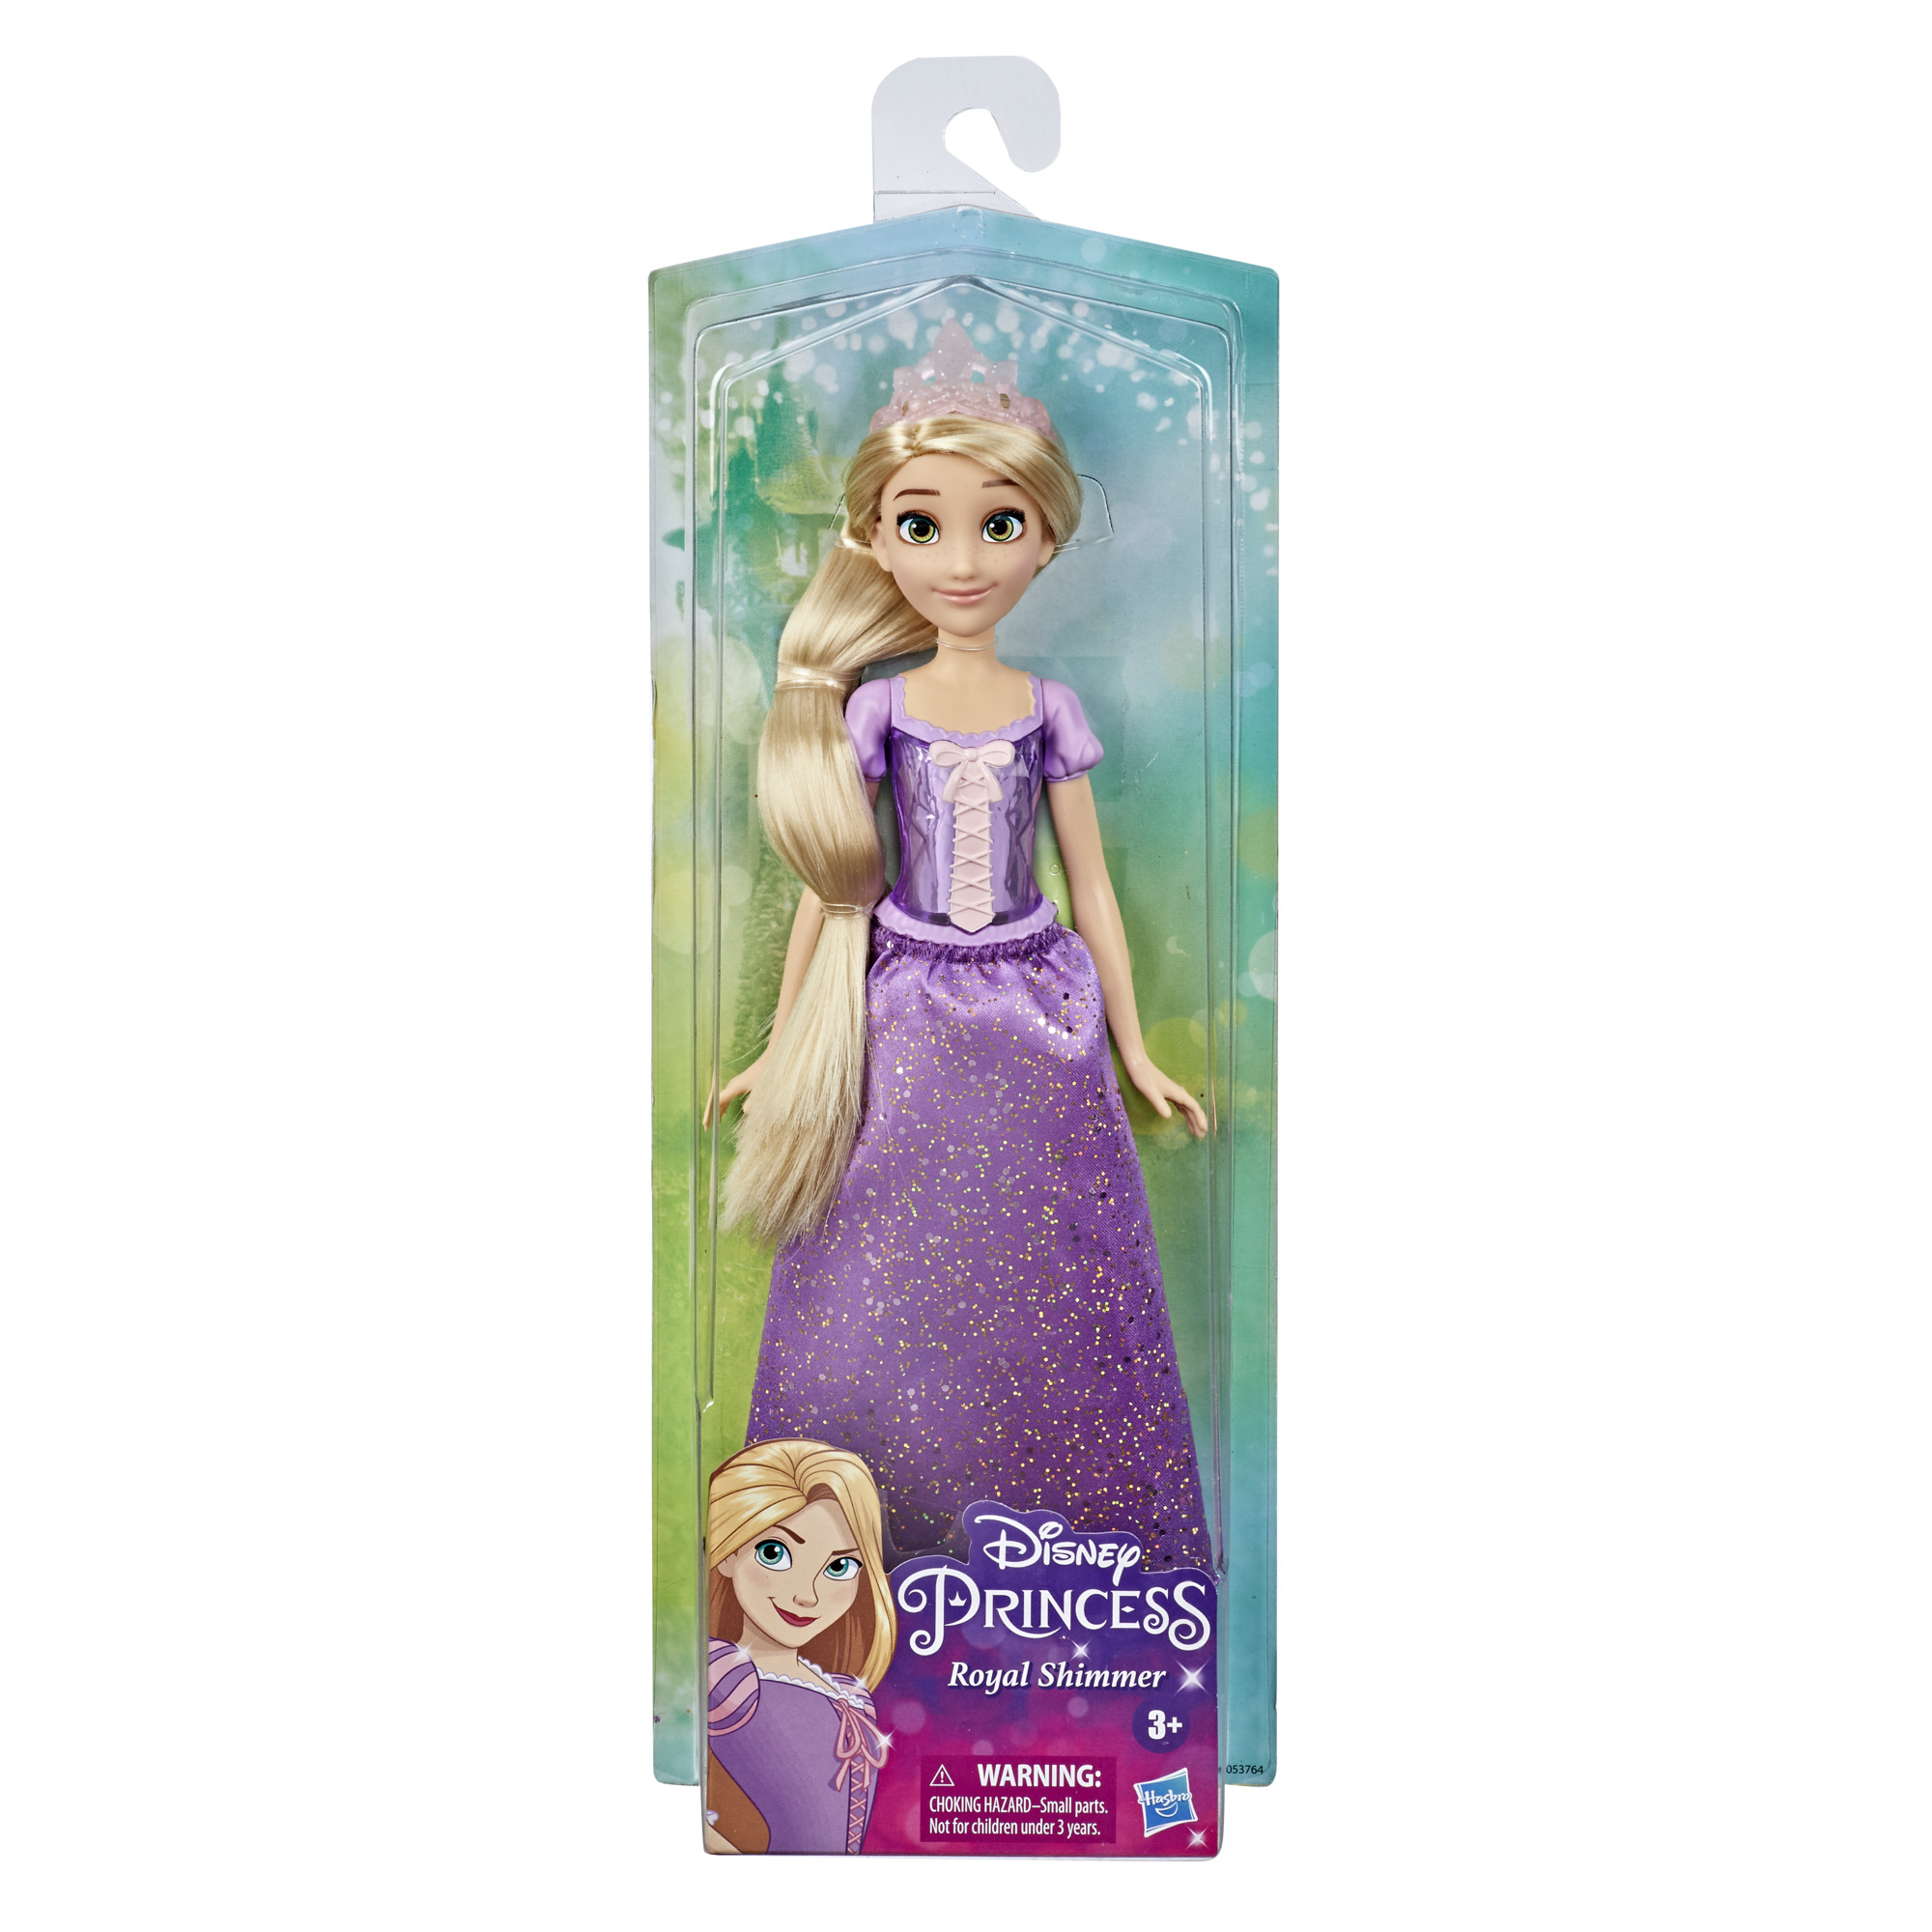 Disney Princess Royal Shimmer Rapunzel Doll, with Skirt and Accessories - image 3 of 8